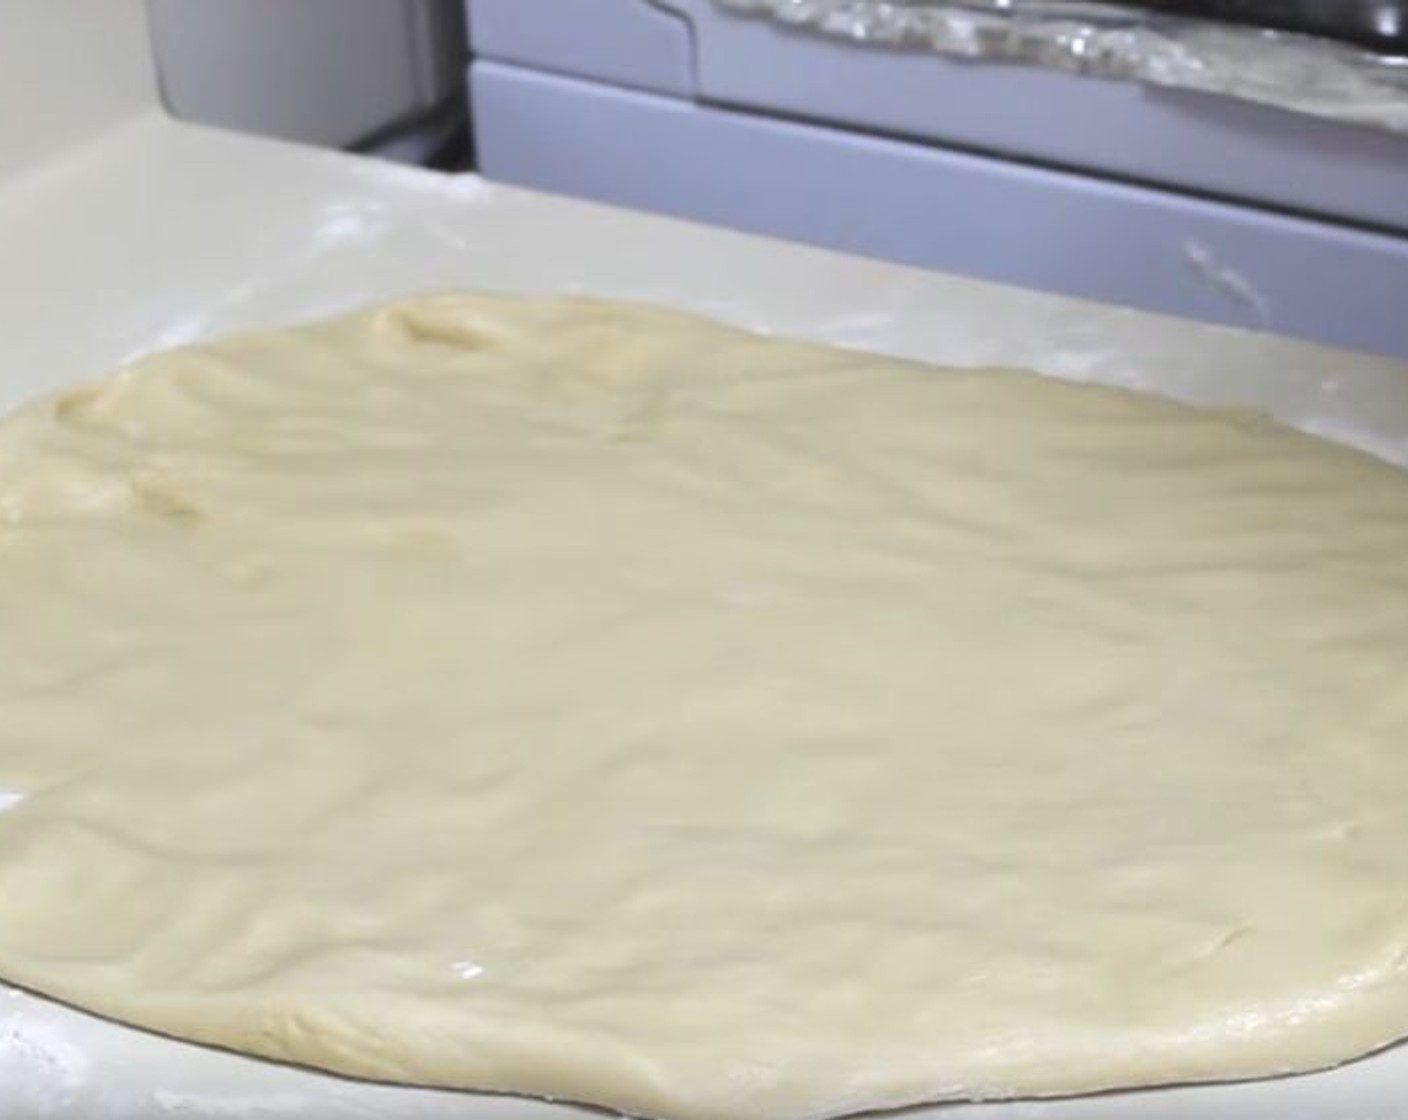 step 6 After about one hour, put the dough onto a floured surface, and using a rolling pin form the dough into a rectangular shape.